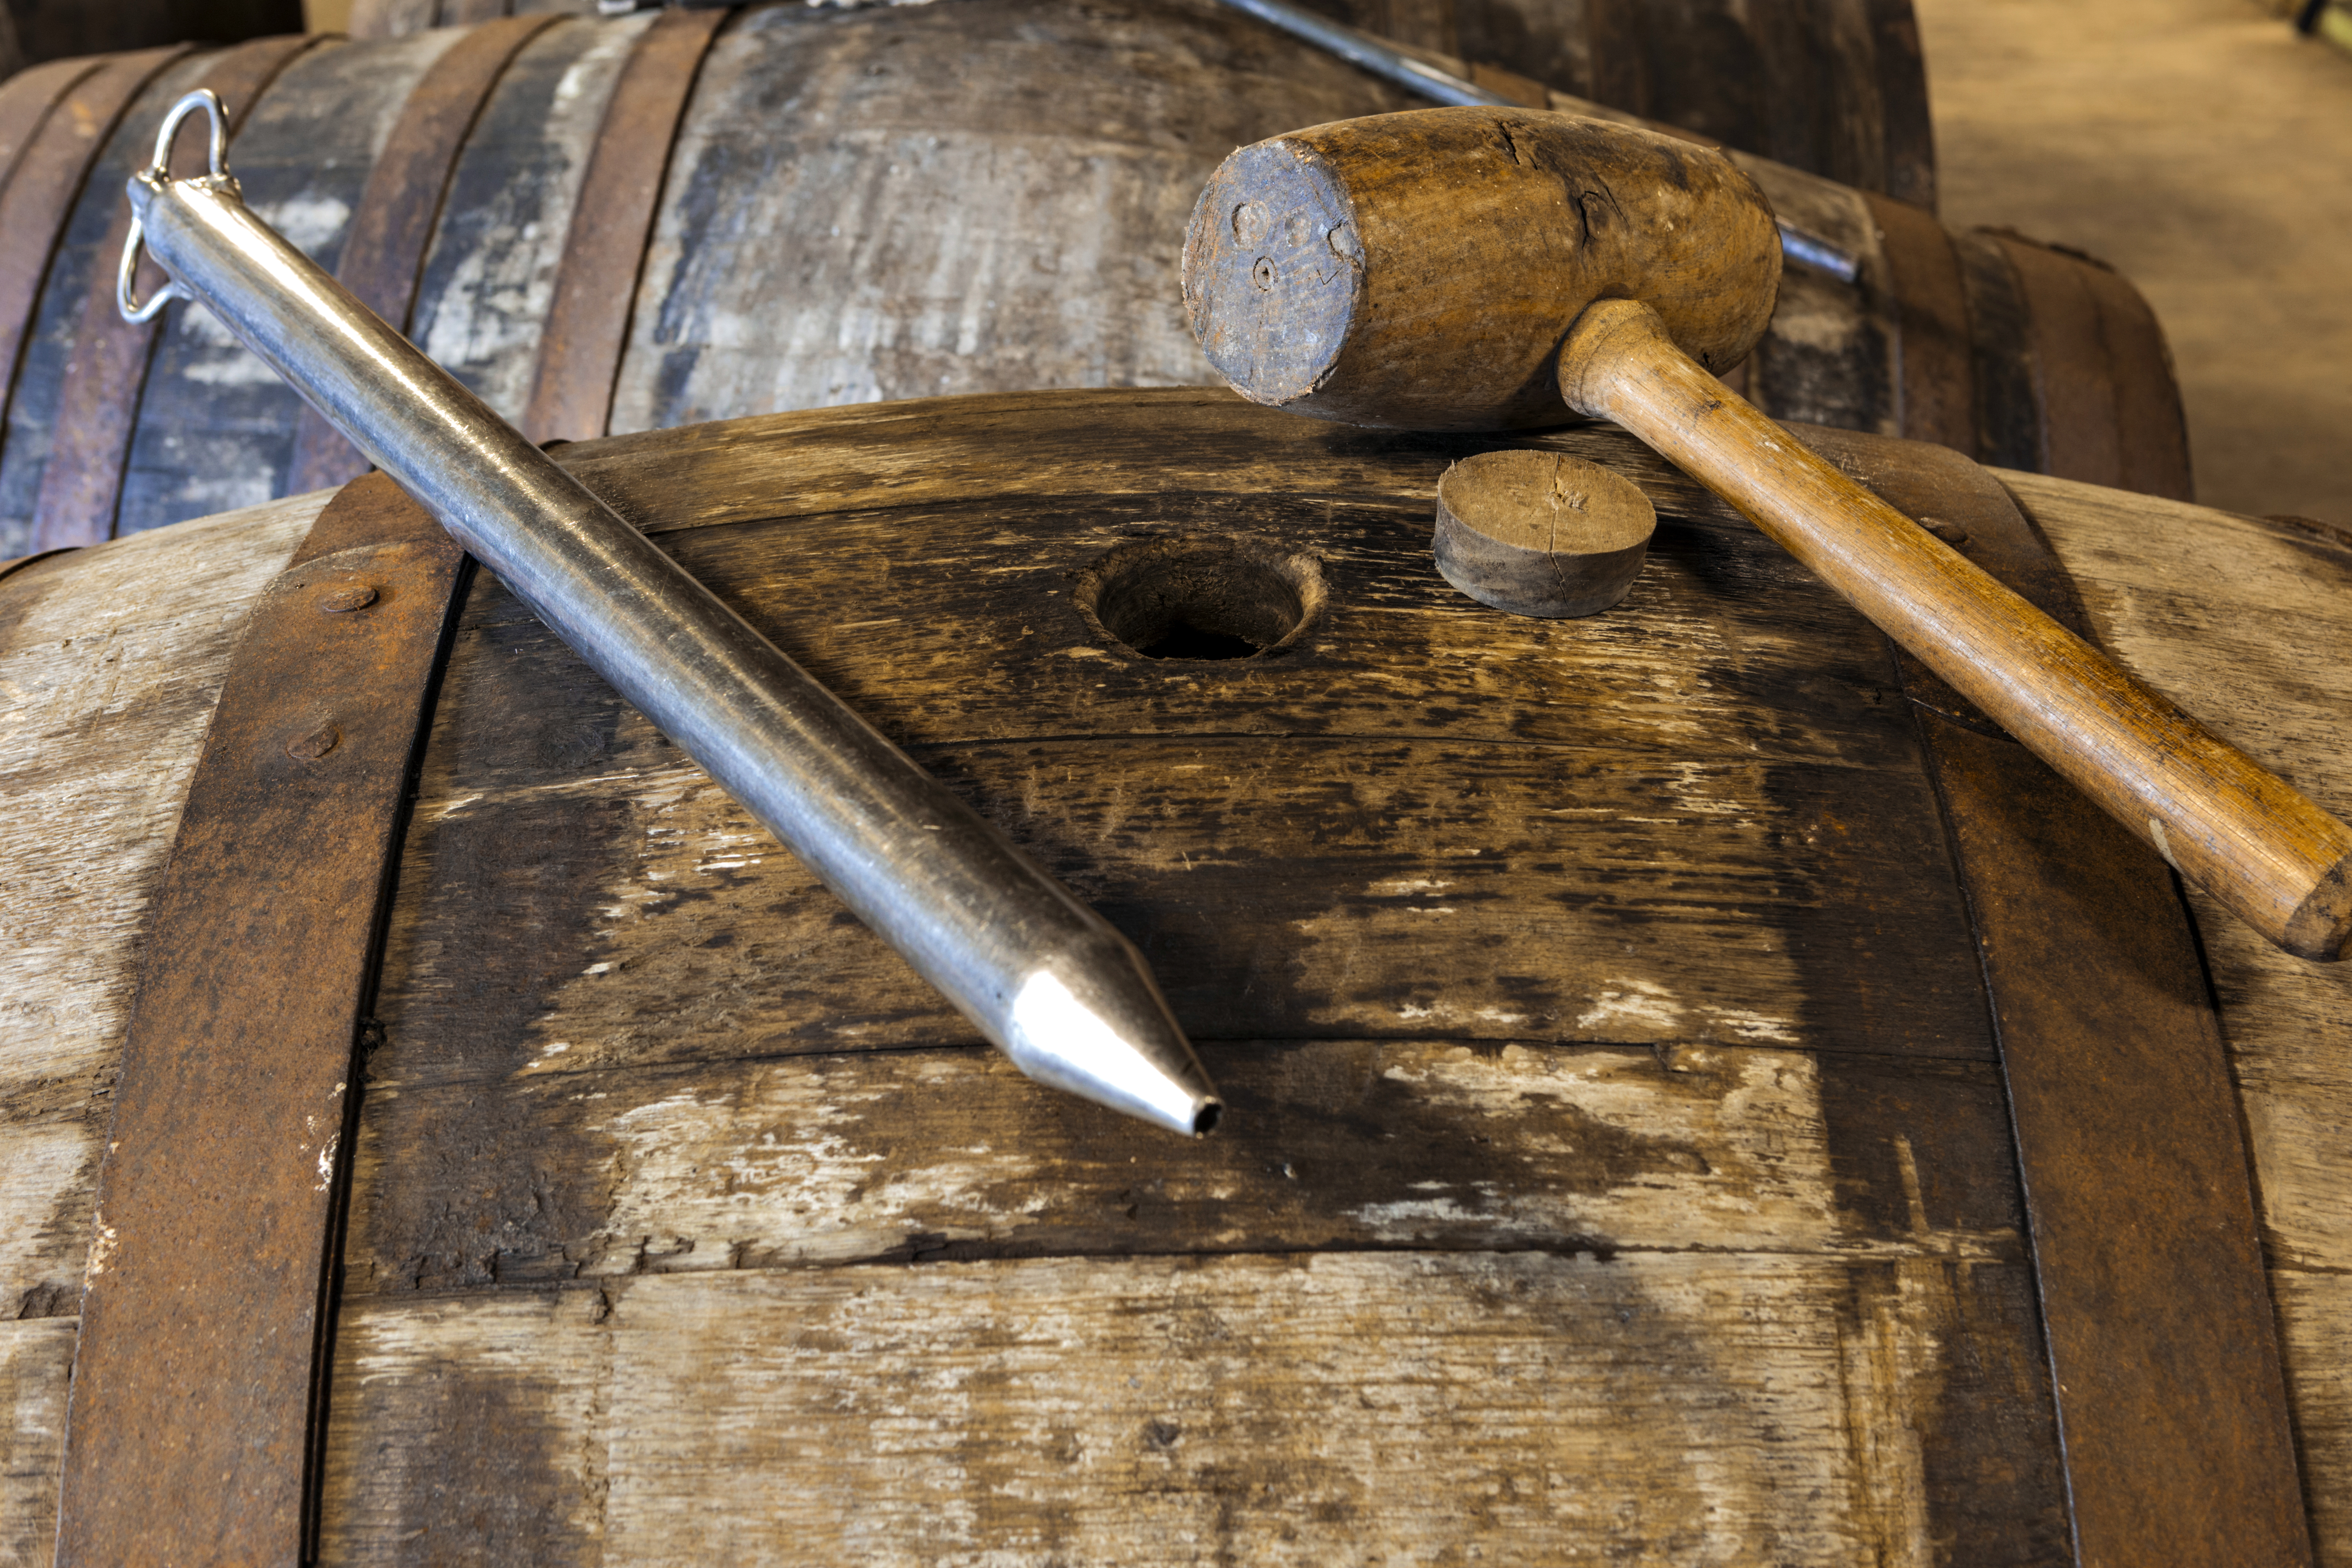 A charred barrel lies on its side with its round opening facing up. Resting on the barrel is a long metal pipette, a cork, and a wooden mallet.